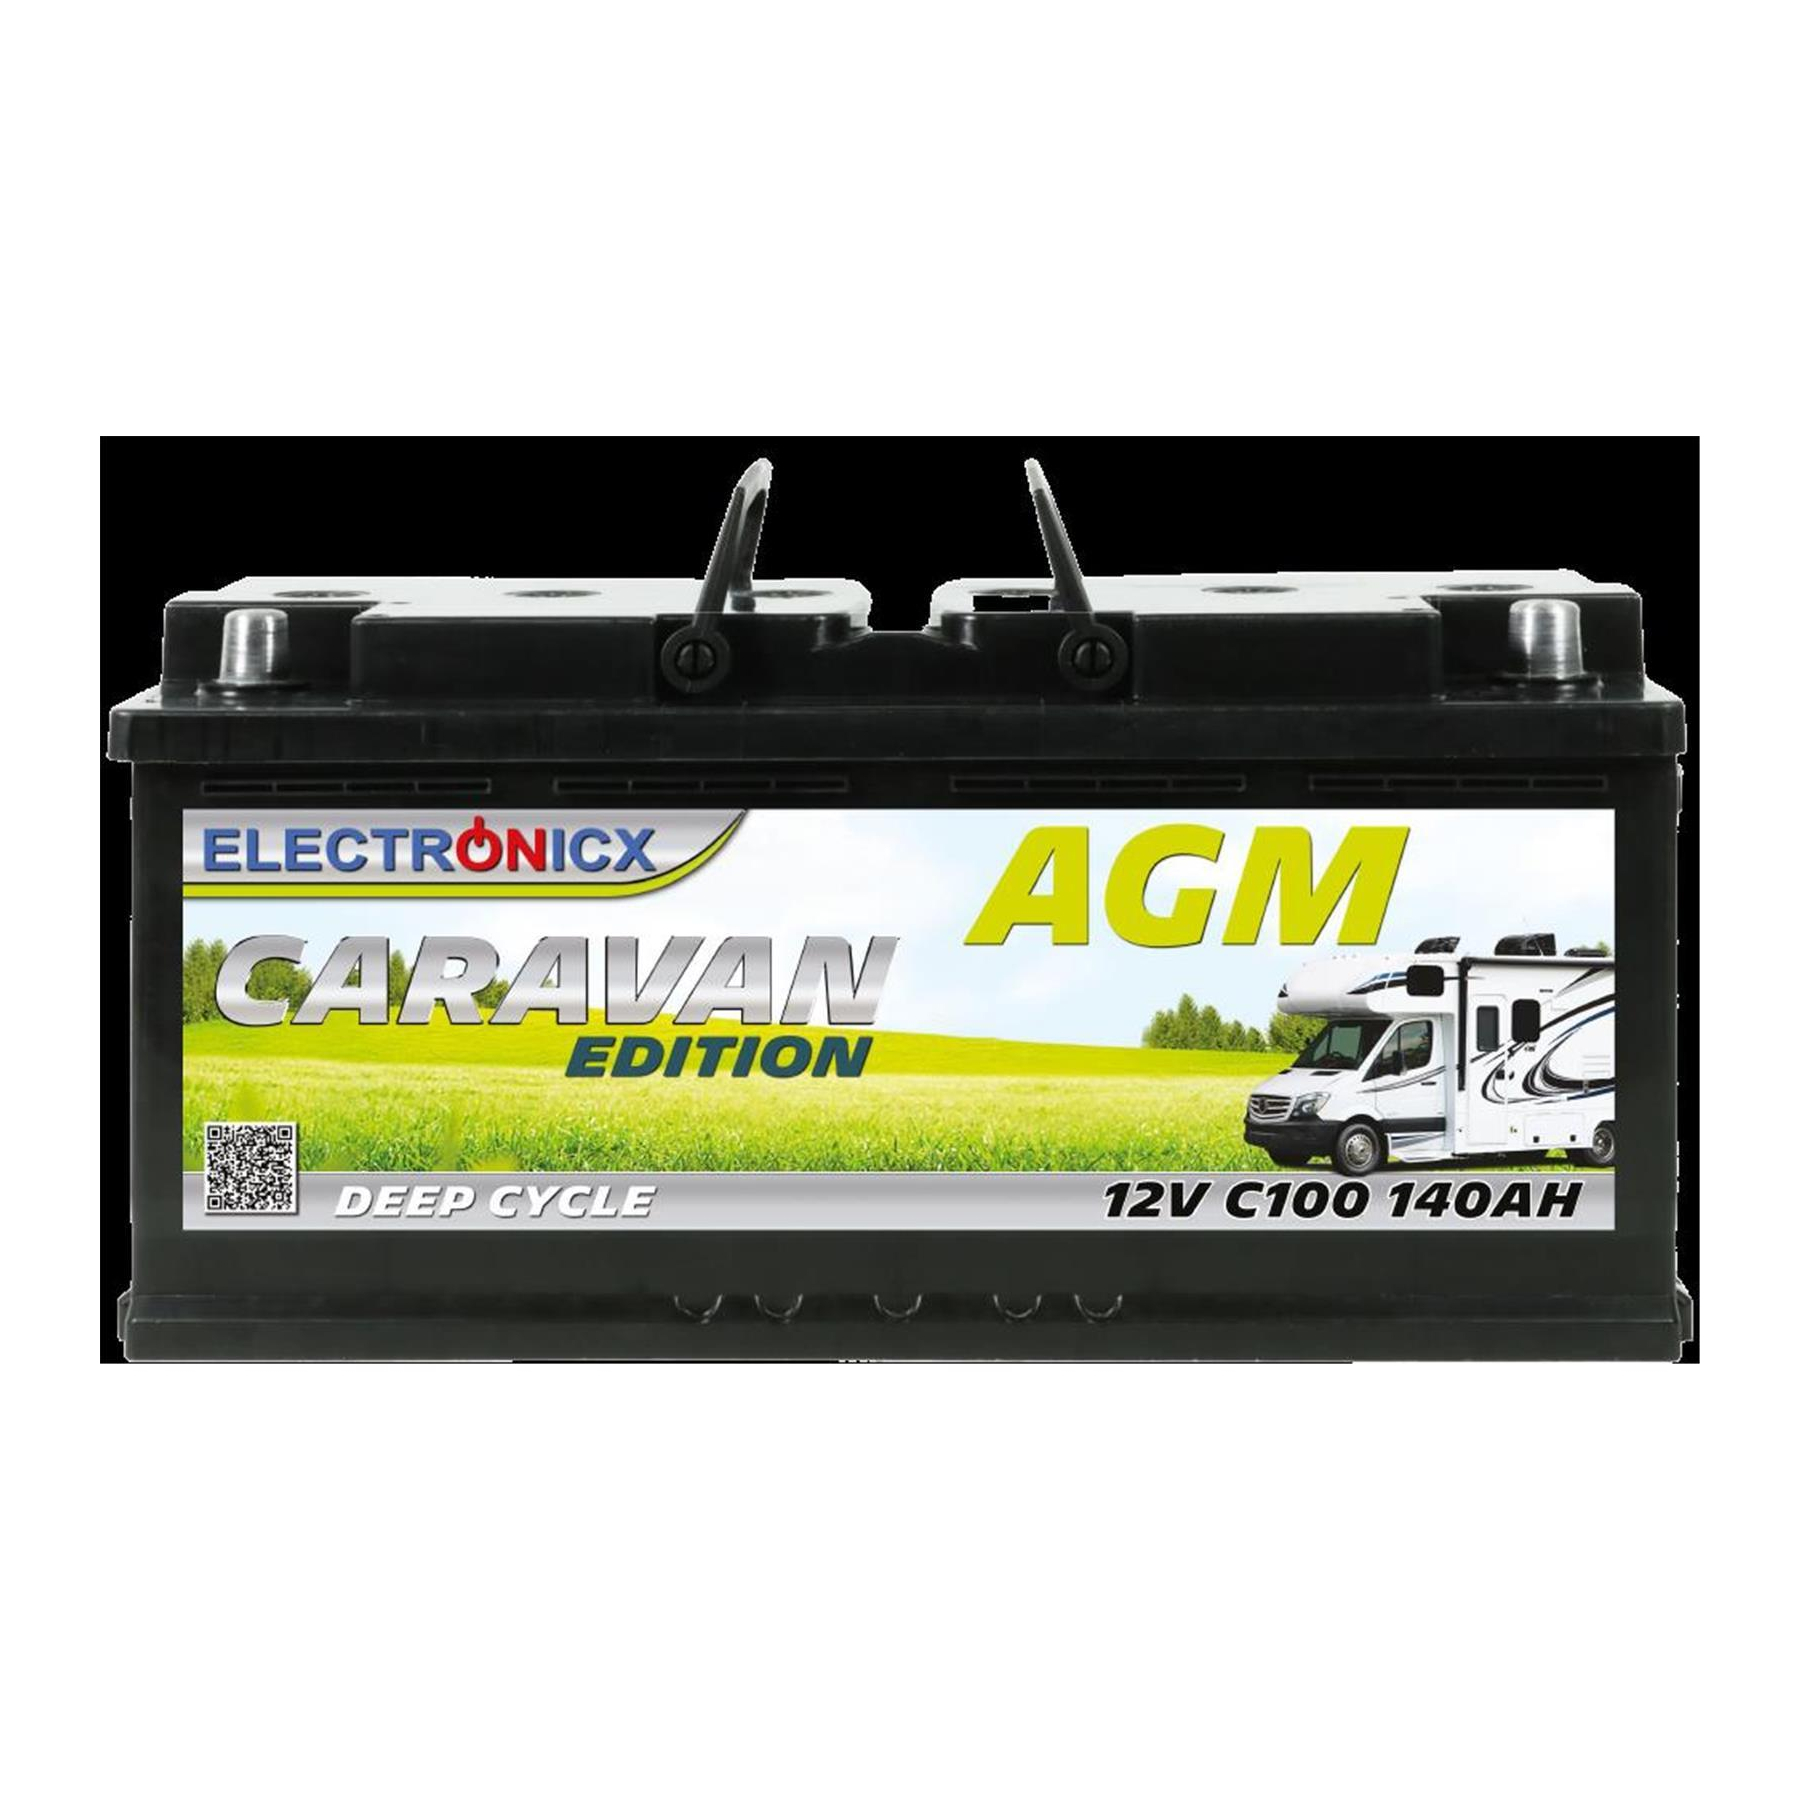 Wohnwagen AGM Batterie 120Ah 12V, Solarbatterie Mover, Camping